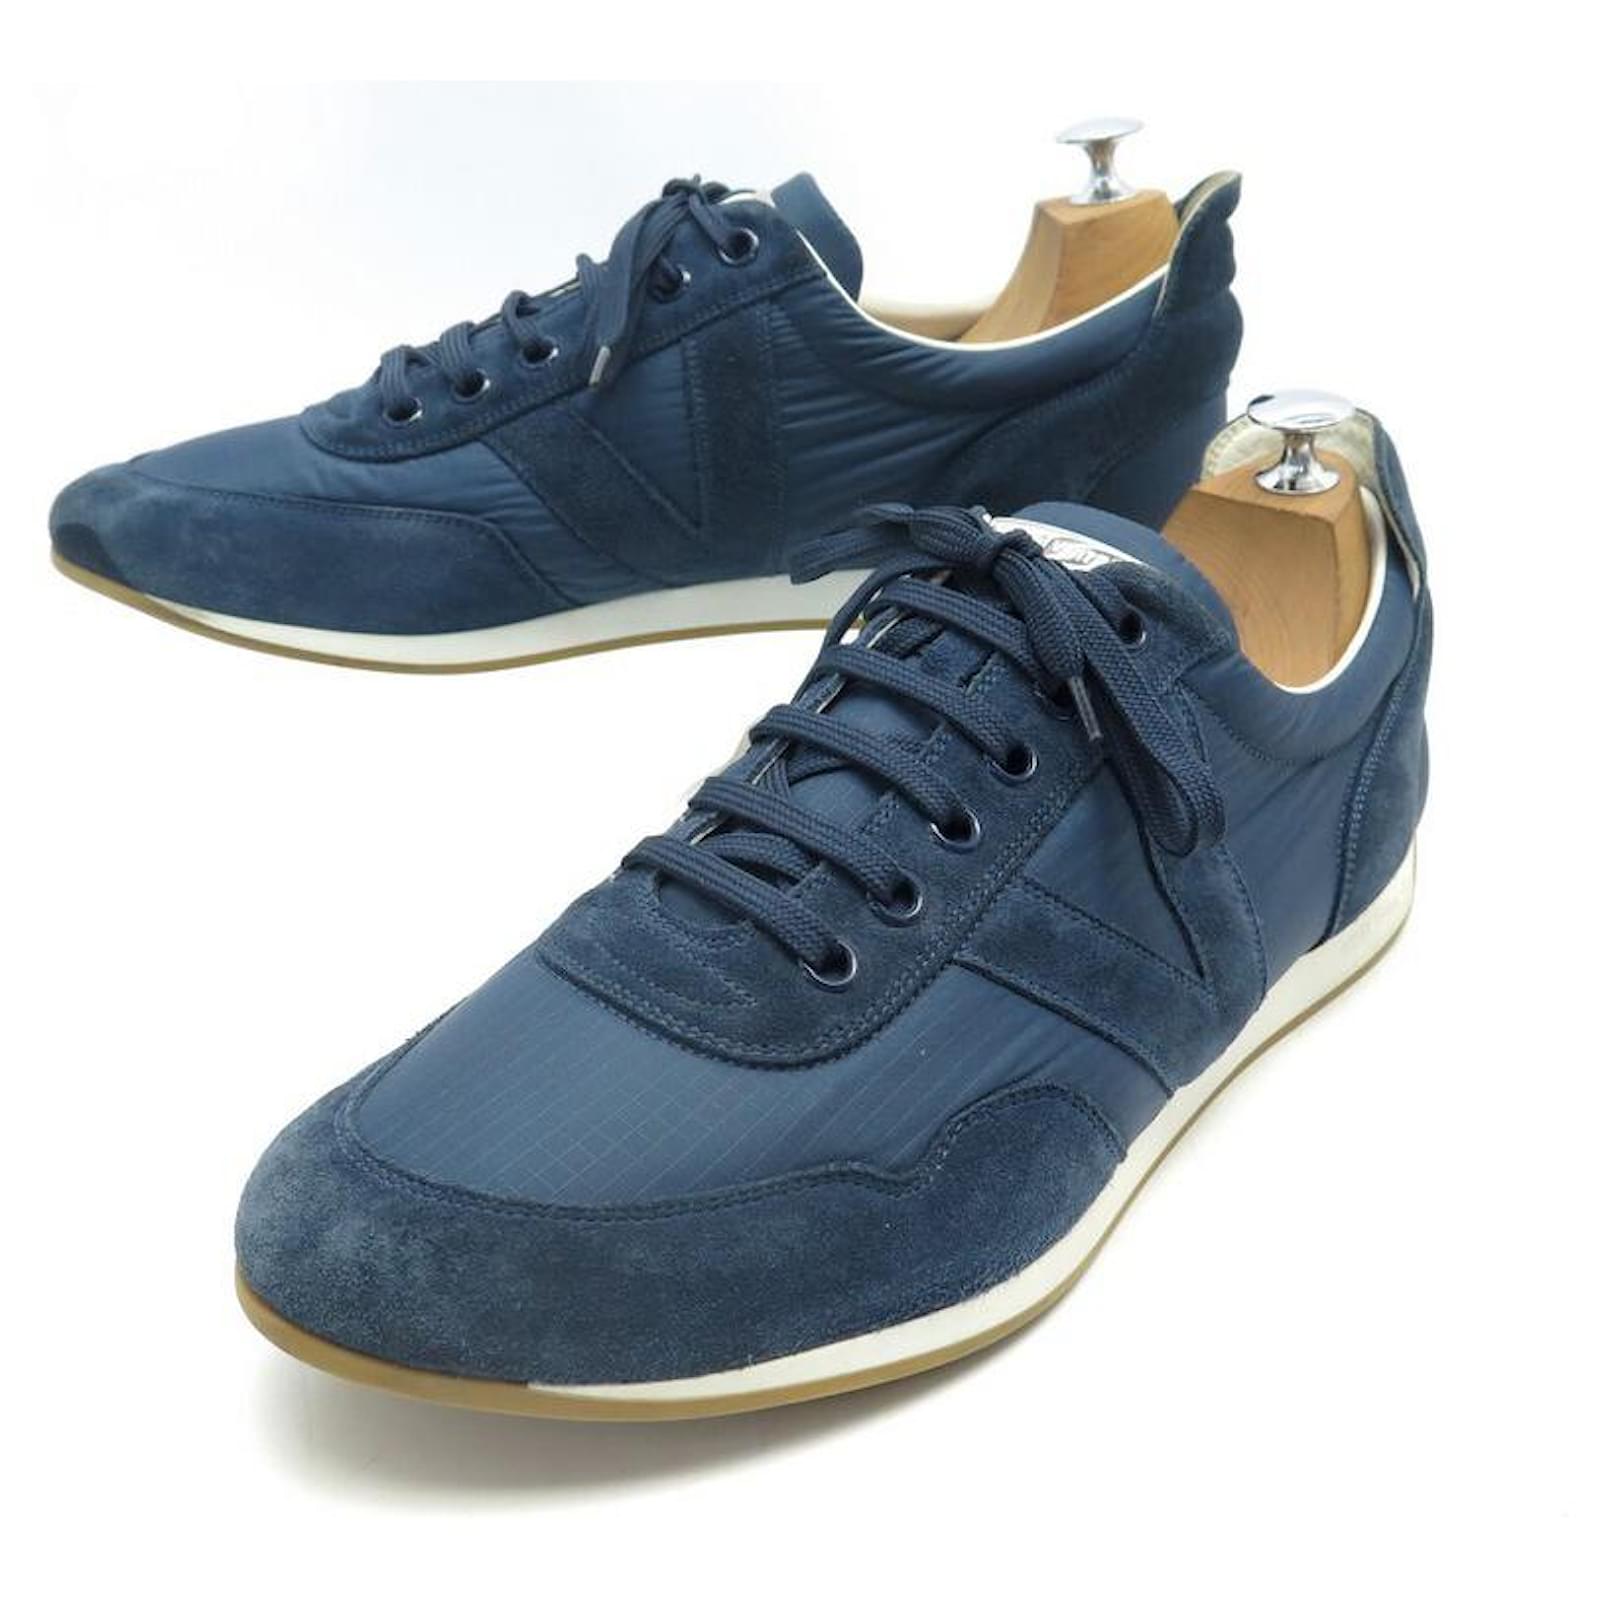 LOUIS VUITTON sneakers SHOES 11 45 IN BLUE CANVAS & SUEDE SNEAKERS SHOES